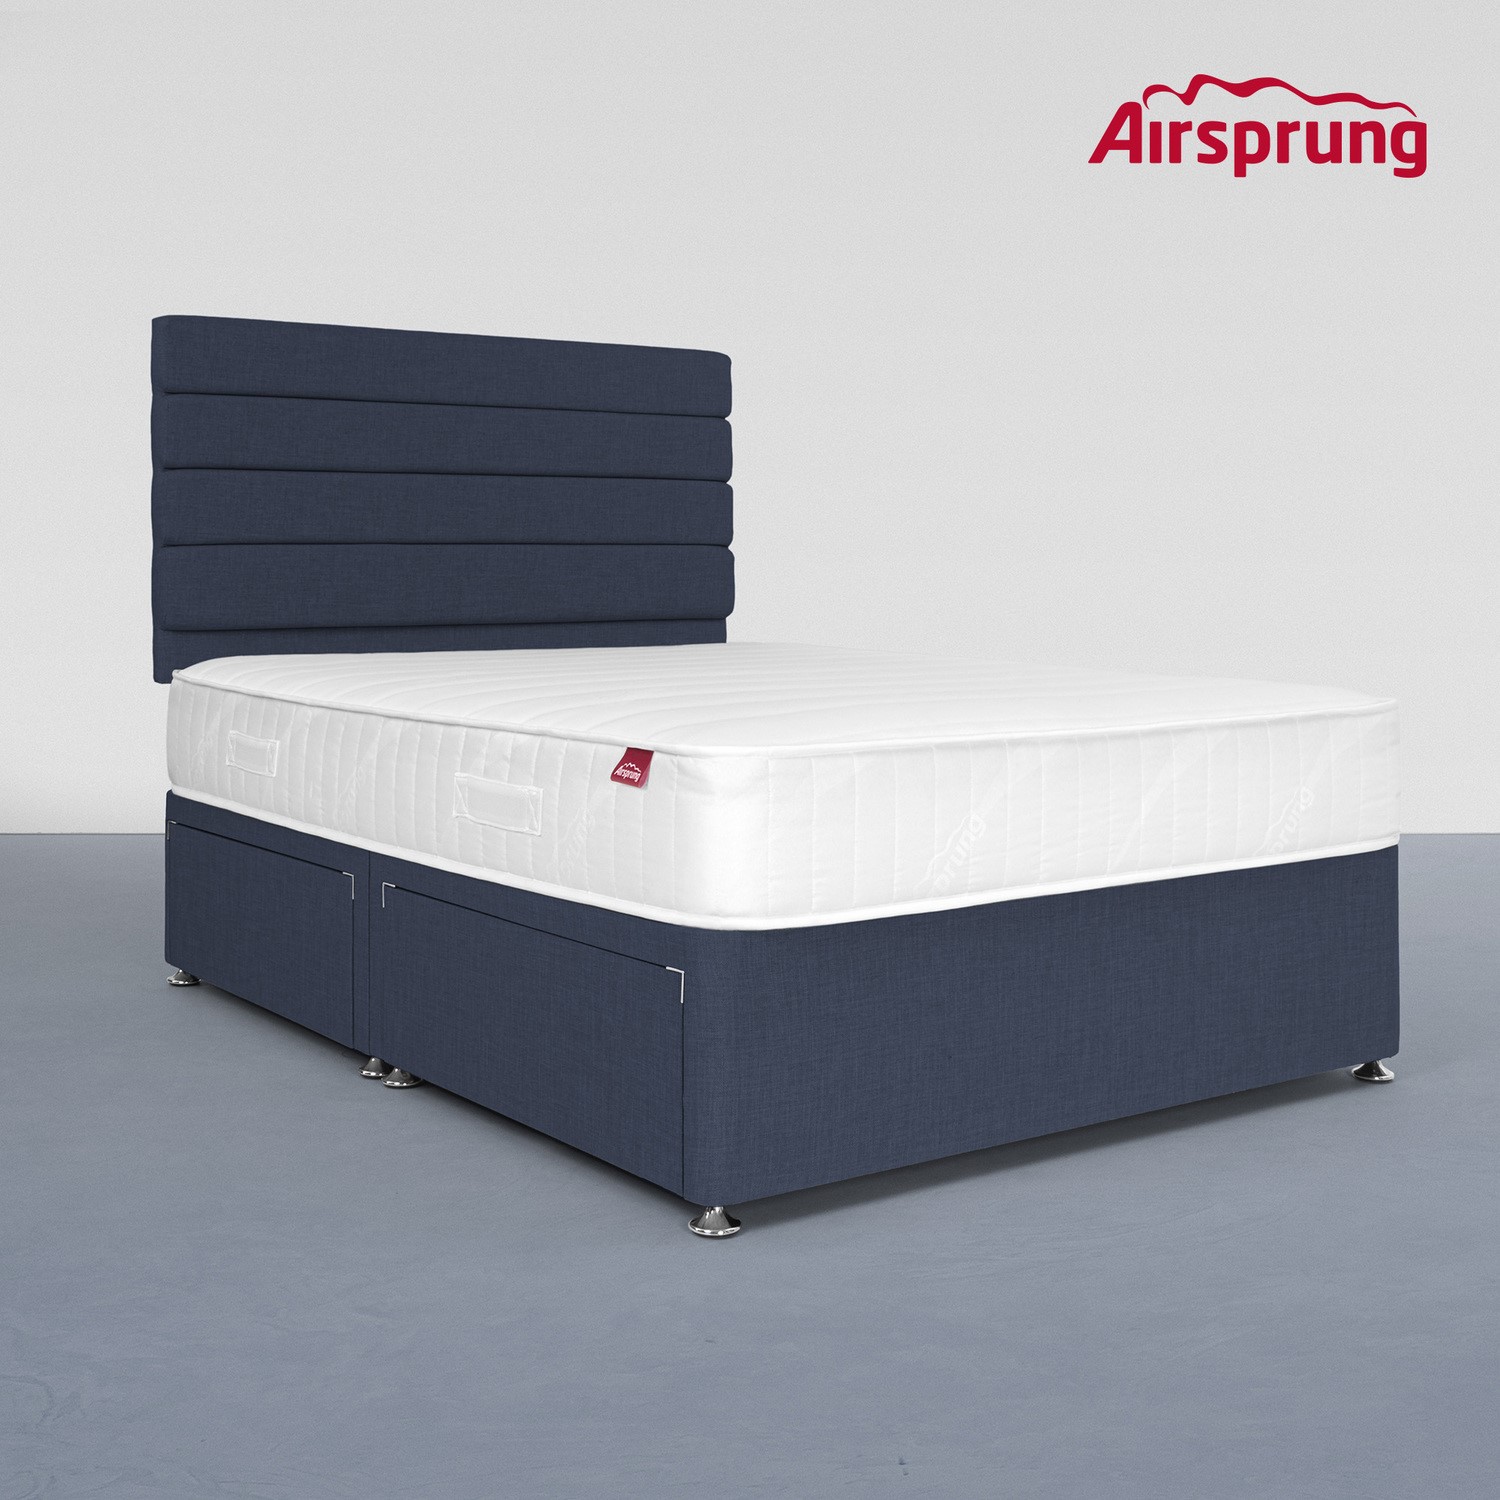 Photo of Airsprung king size 4 drawer divan bed with comfort mattress - midnight blue